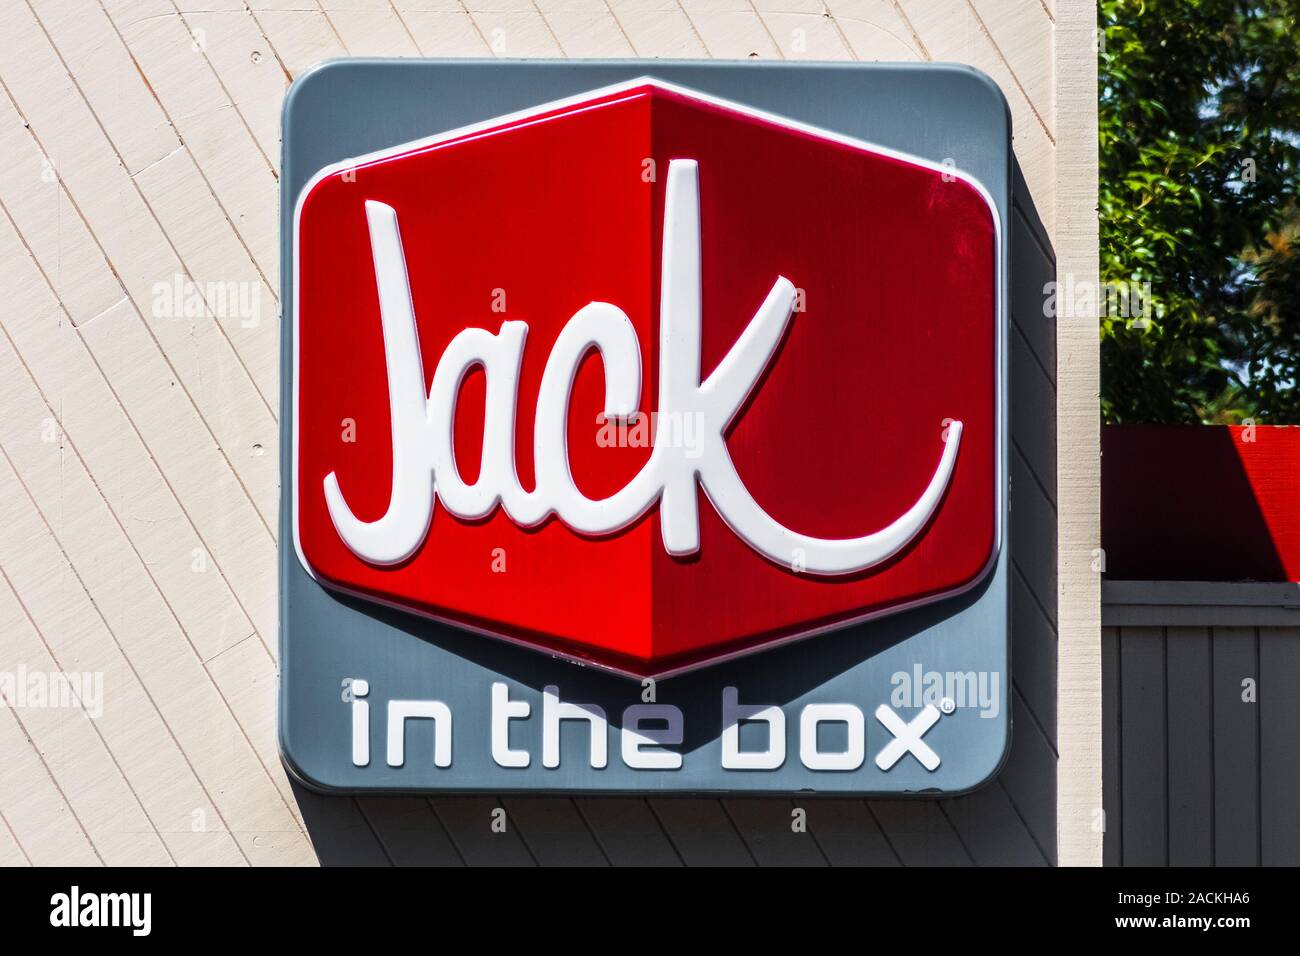 Aug 13, 2019 Santa Clara / CA / USA - Jack in the box sign at one of their locations in South San Francisco bay area Stock Photo